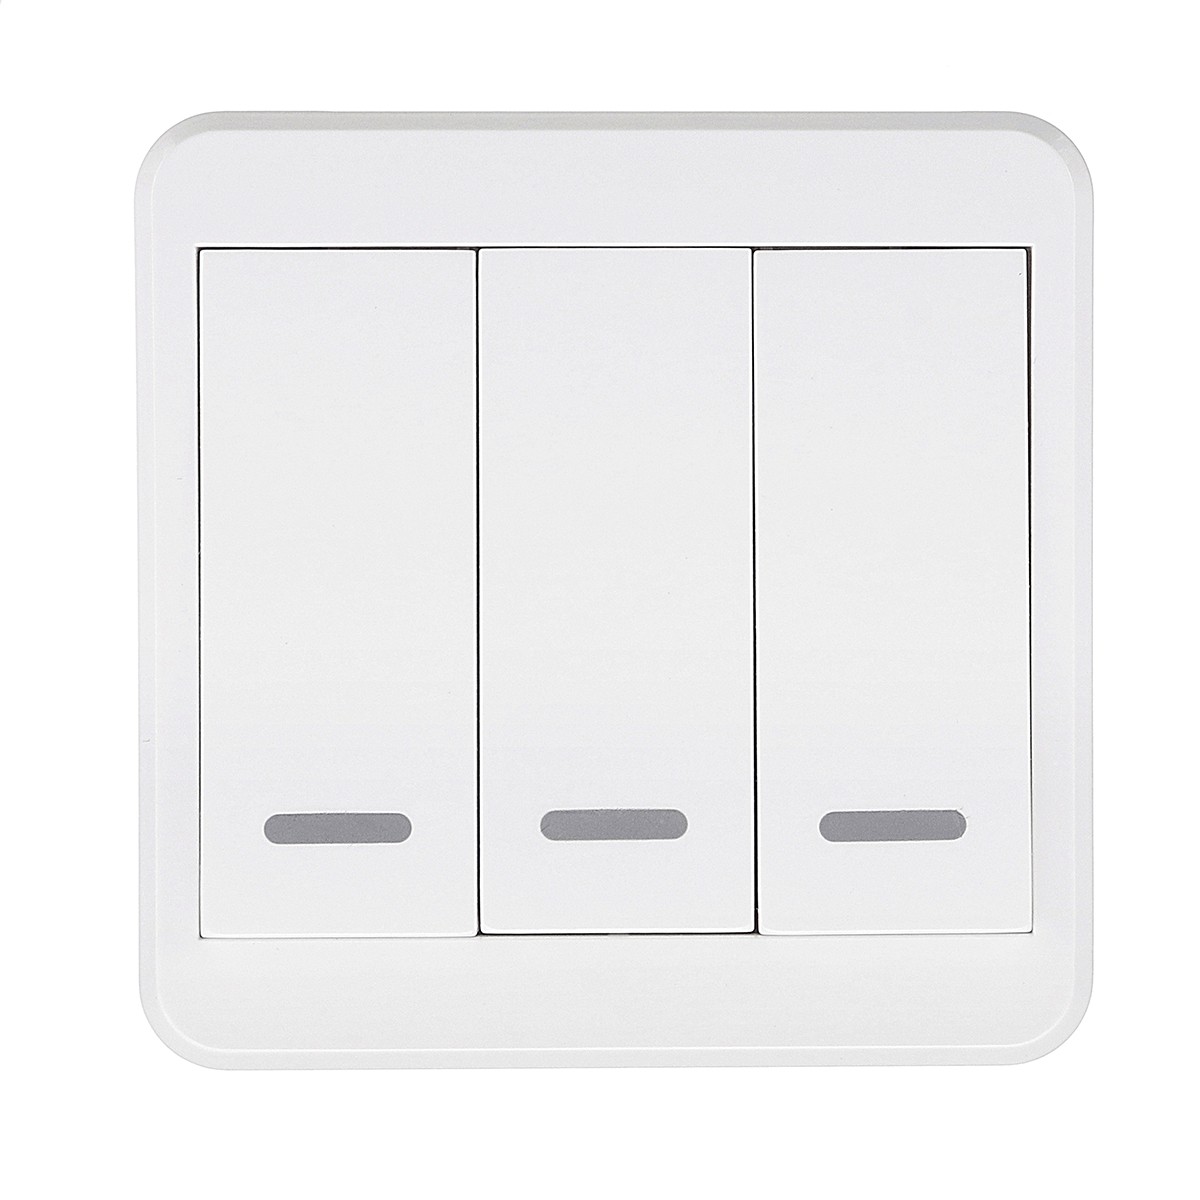 123-Way-Push-Button-Switch-Remote-Control-Switch-86-Wall-Panel-315MHz-Wireless-1334553